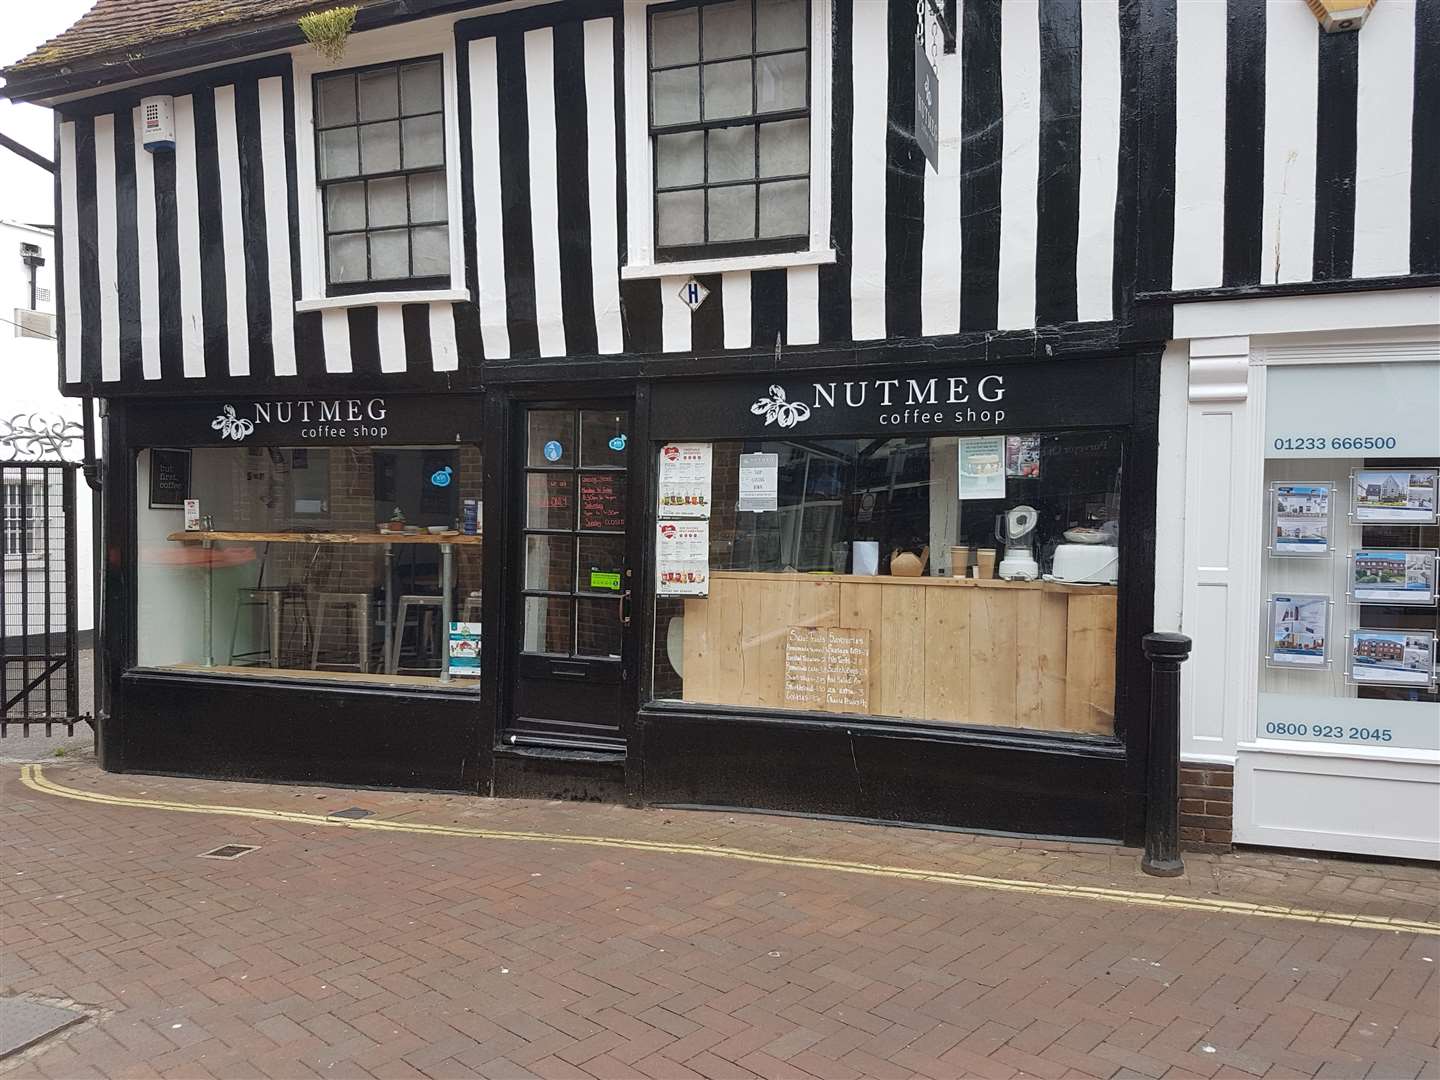 Nutmeg Coffee Shop had been in the high street for two years